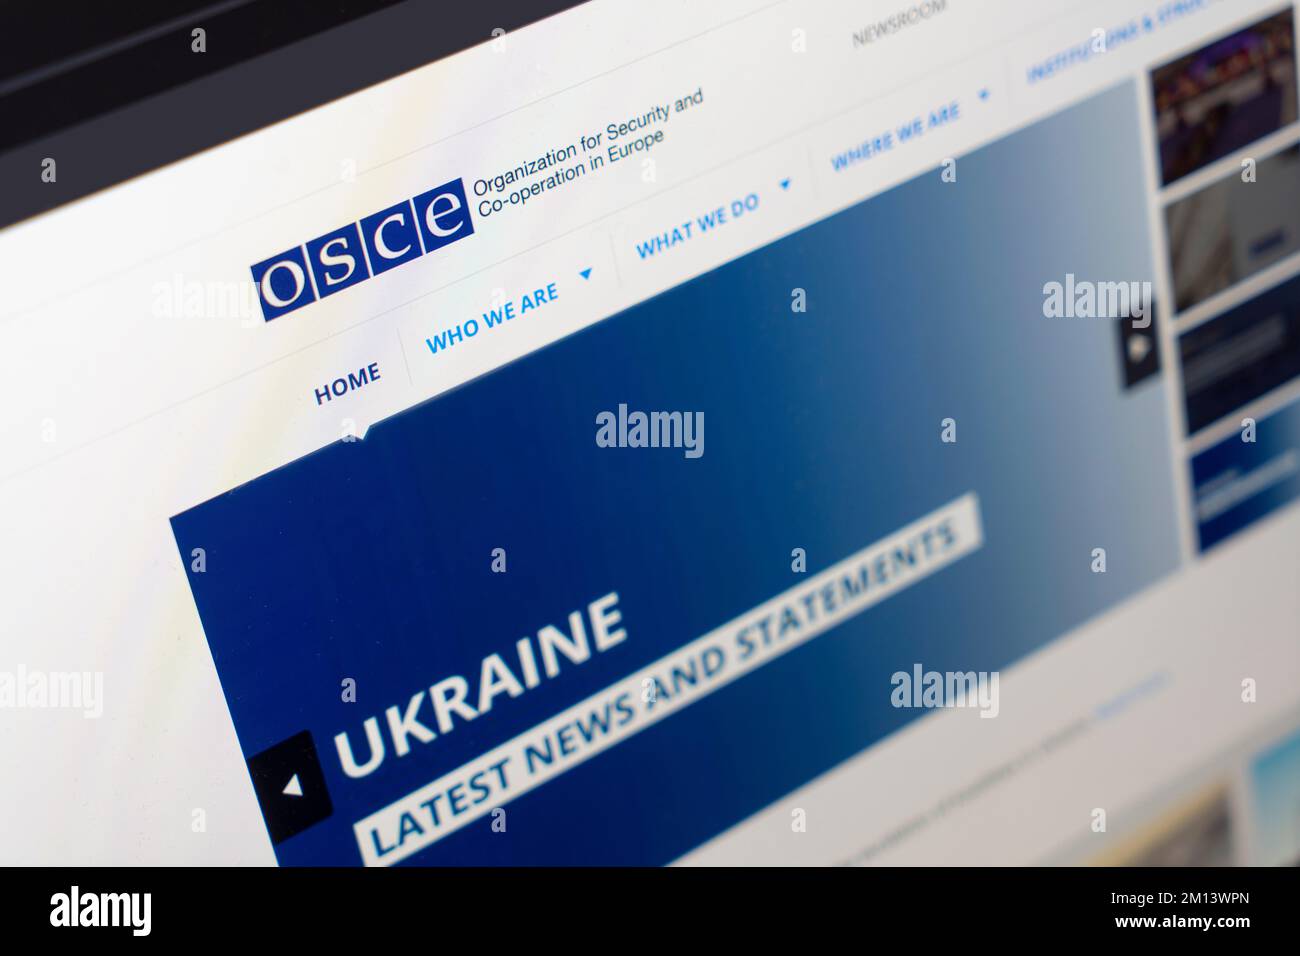 View  of OSCE, the Organization for Security and Co-operation in Europe web page Stock Photo